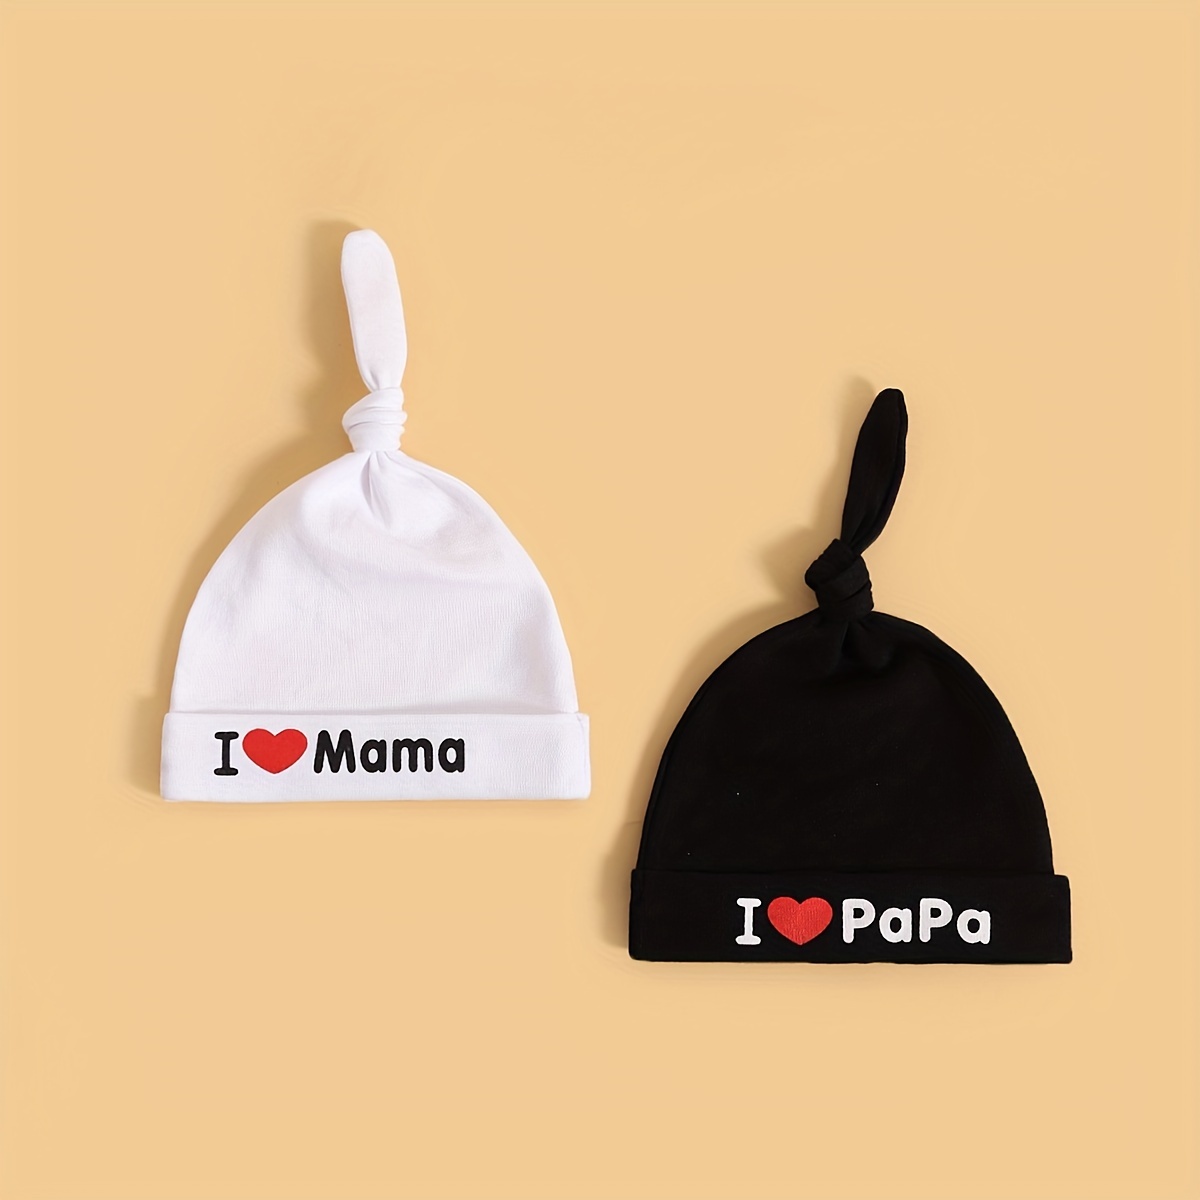 

2pcs Baby Hats Set, Letter Printing Newborn Hats, Cute Black And White Fetal Hats For Boys And Girls, Infant Baby Cap 0-6 Months Hats Set